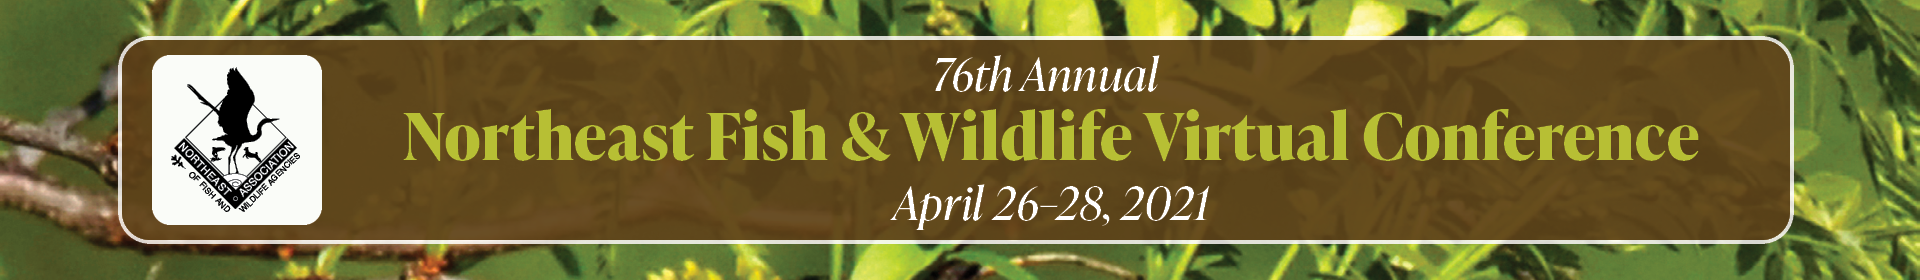 76th Annual Northeast Fish & Wildlife Virtual Conference Event Banner